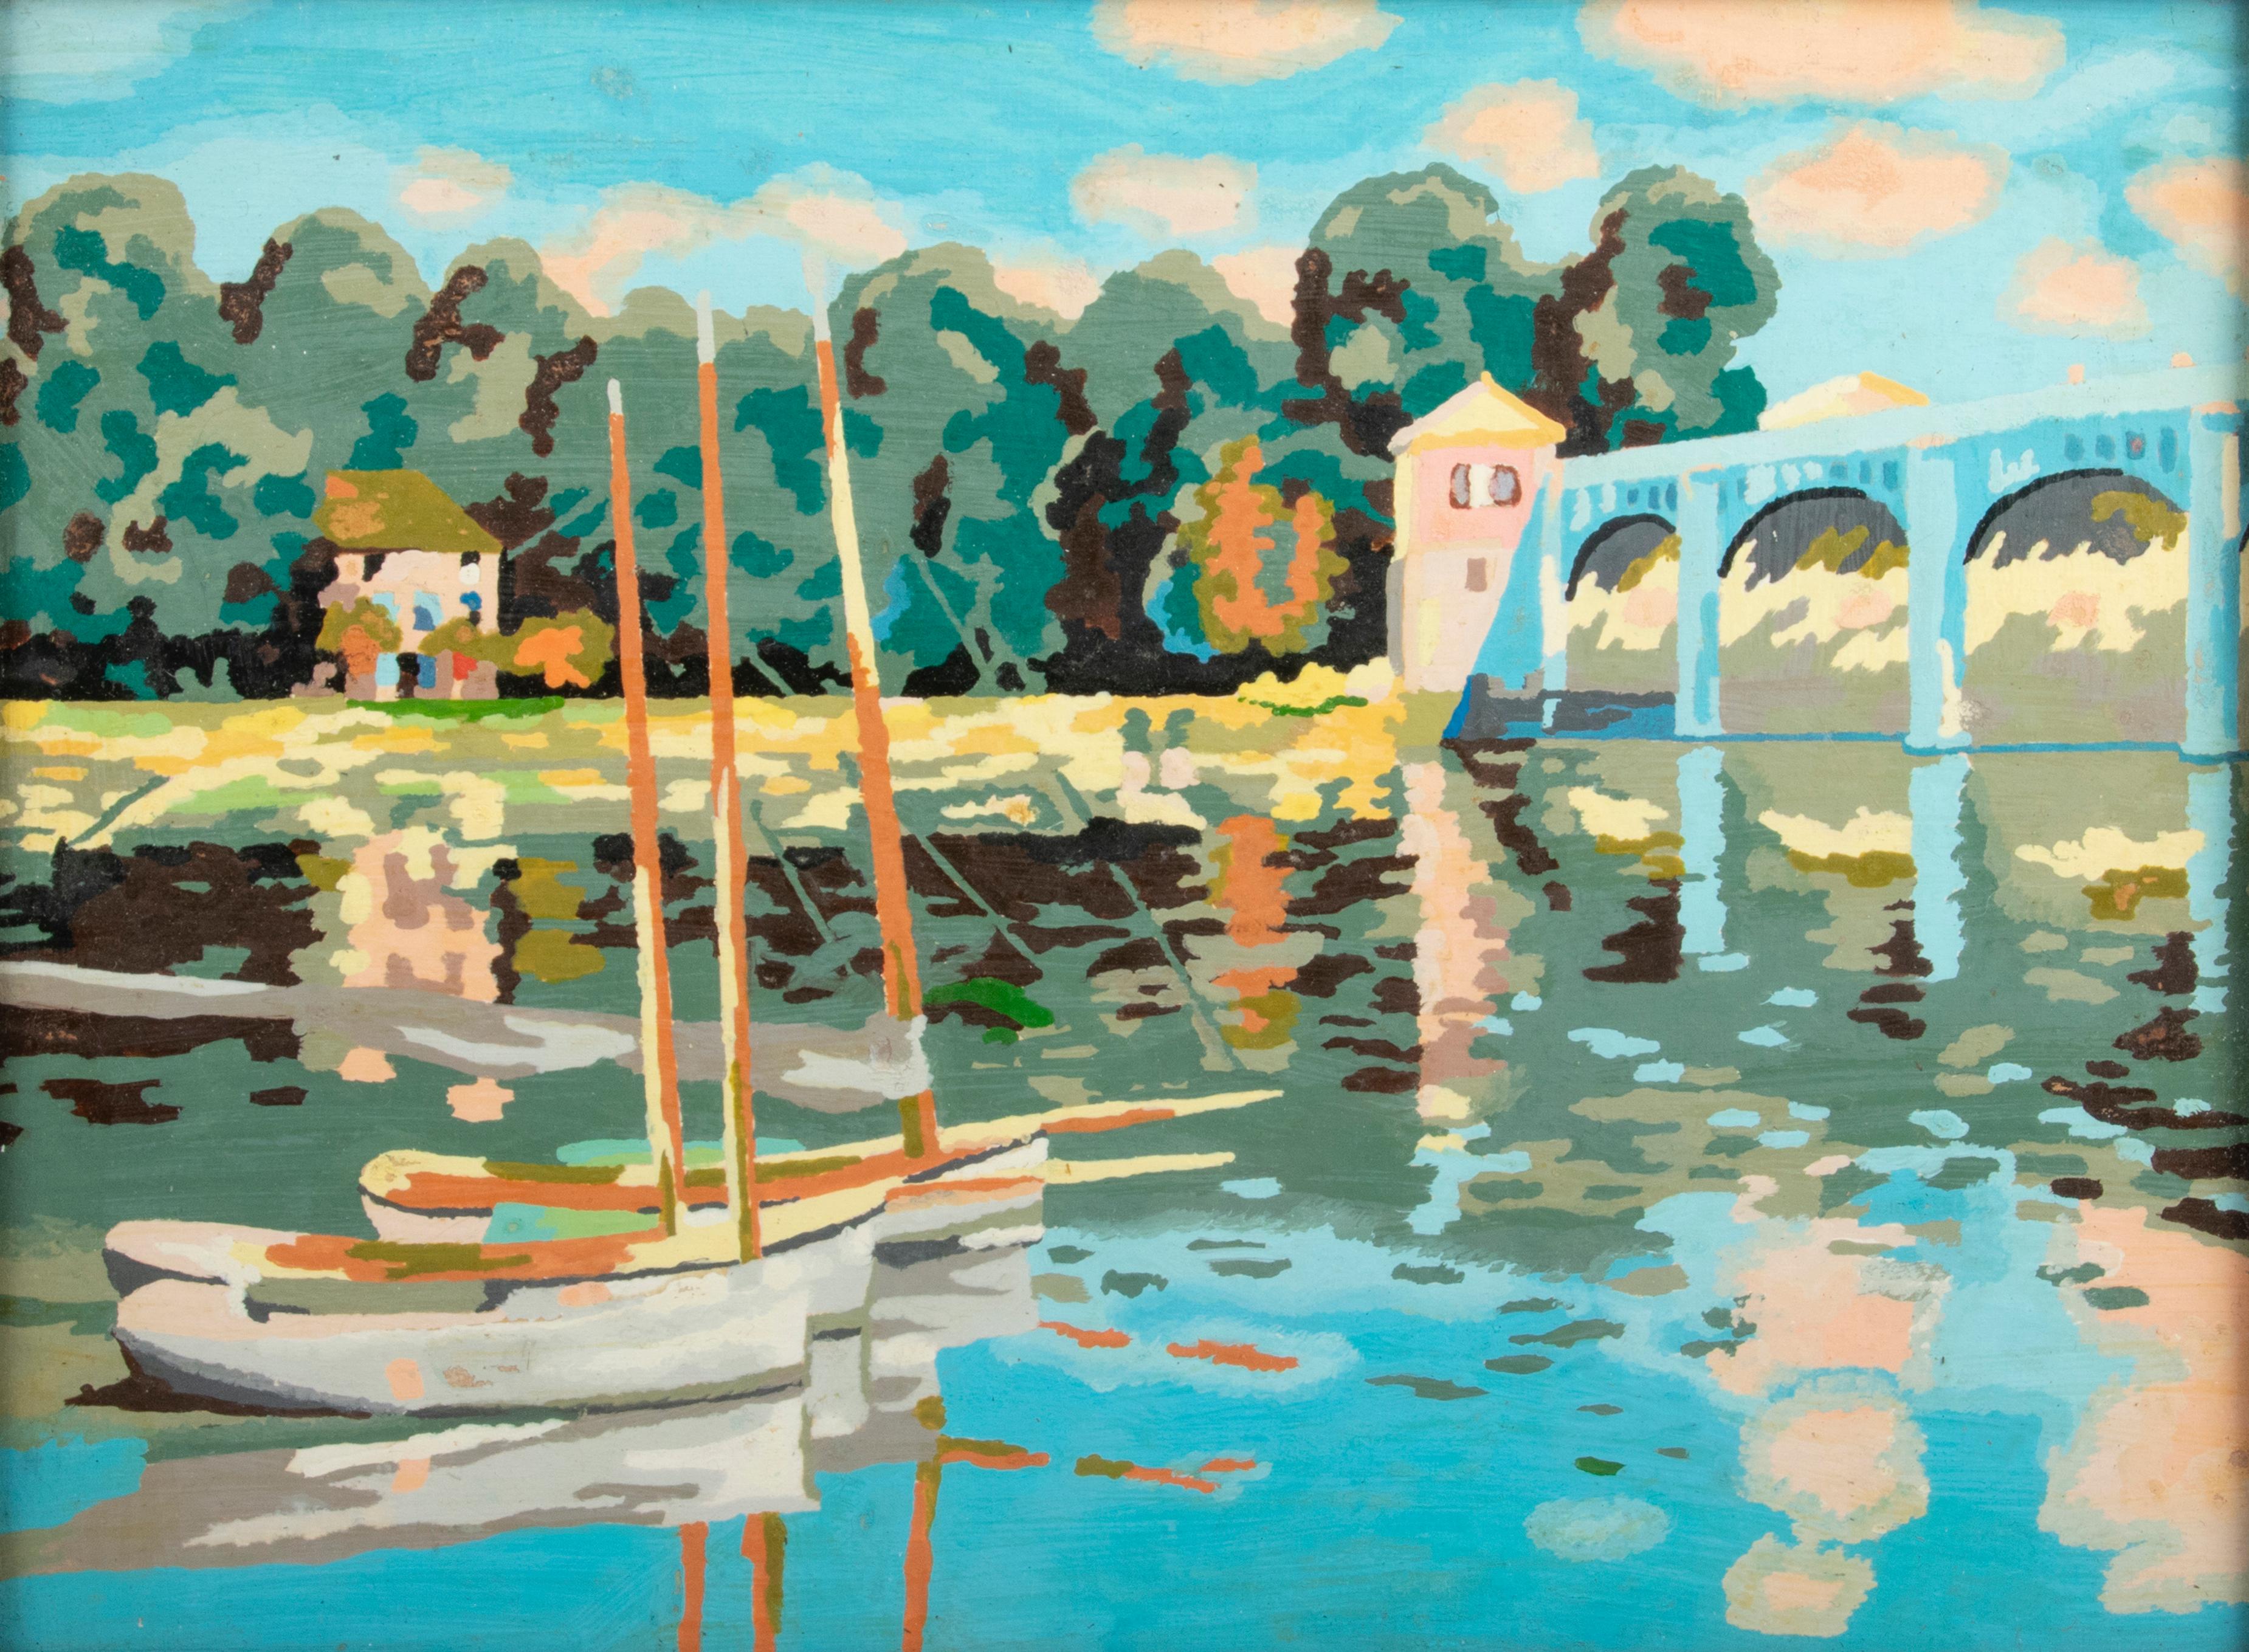 Very colorful painting of a water landscape with small sailing boats and trees in the background. The painting is not signed. The painting stands out because of its great use of color. Based on the landscape, with the aqueduct in the background, it